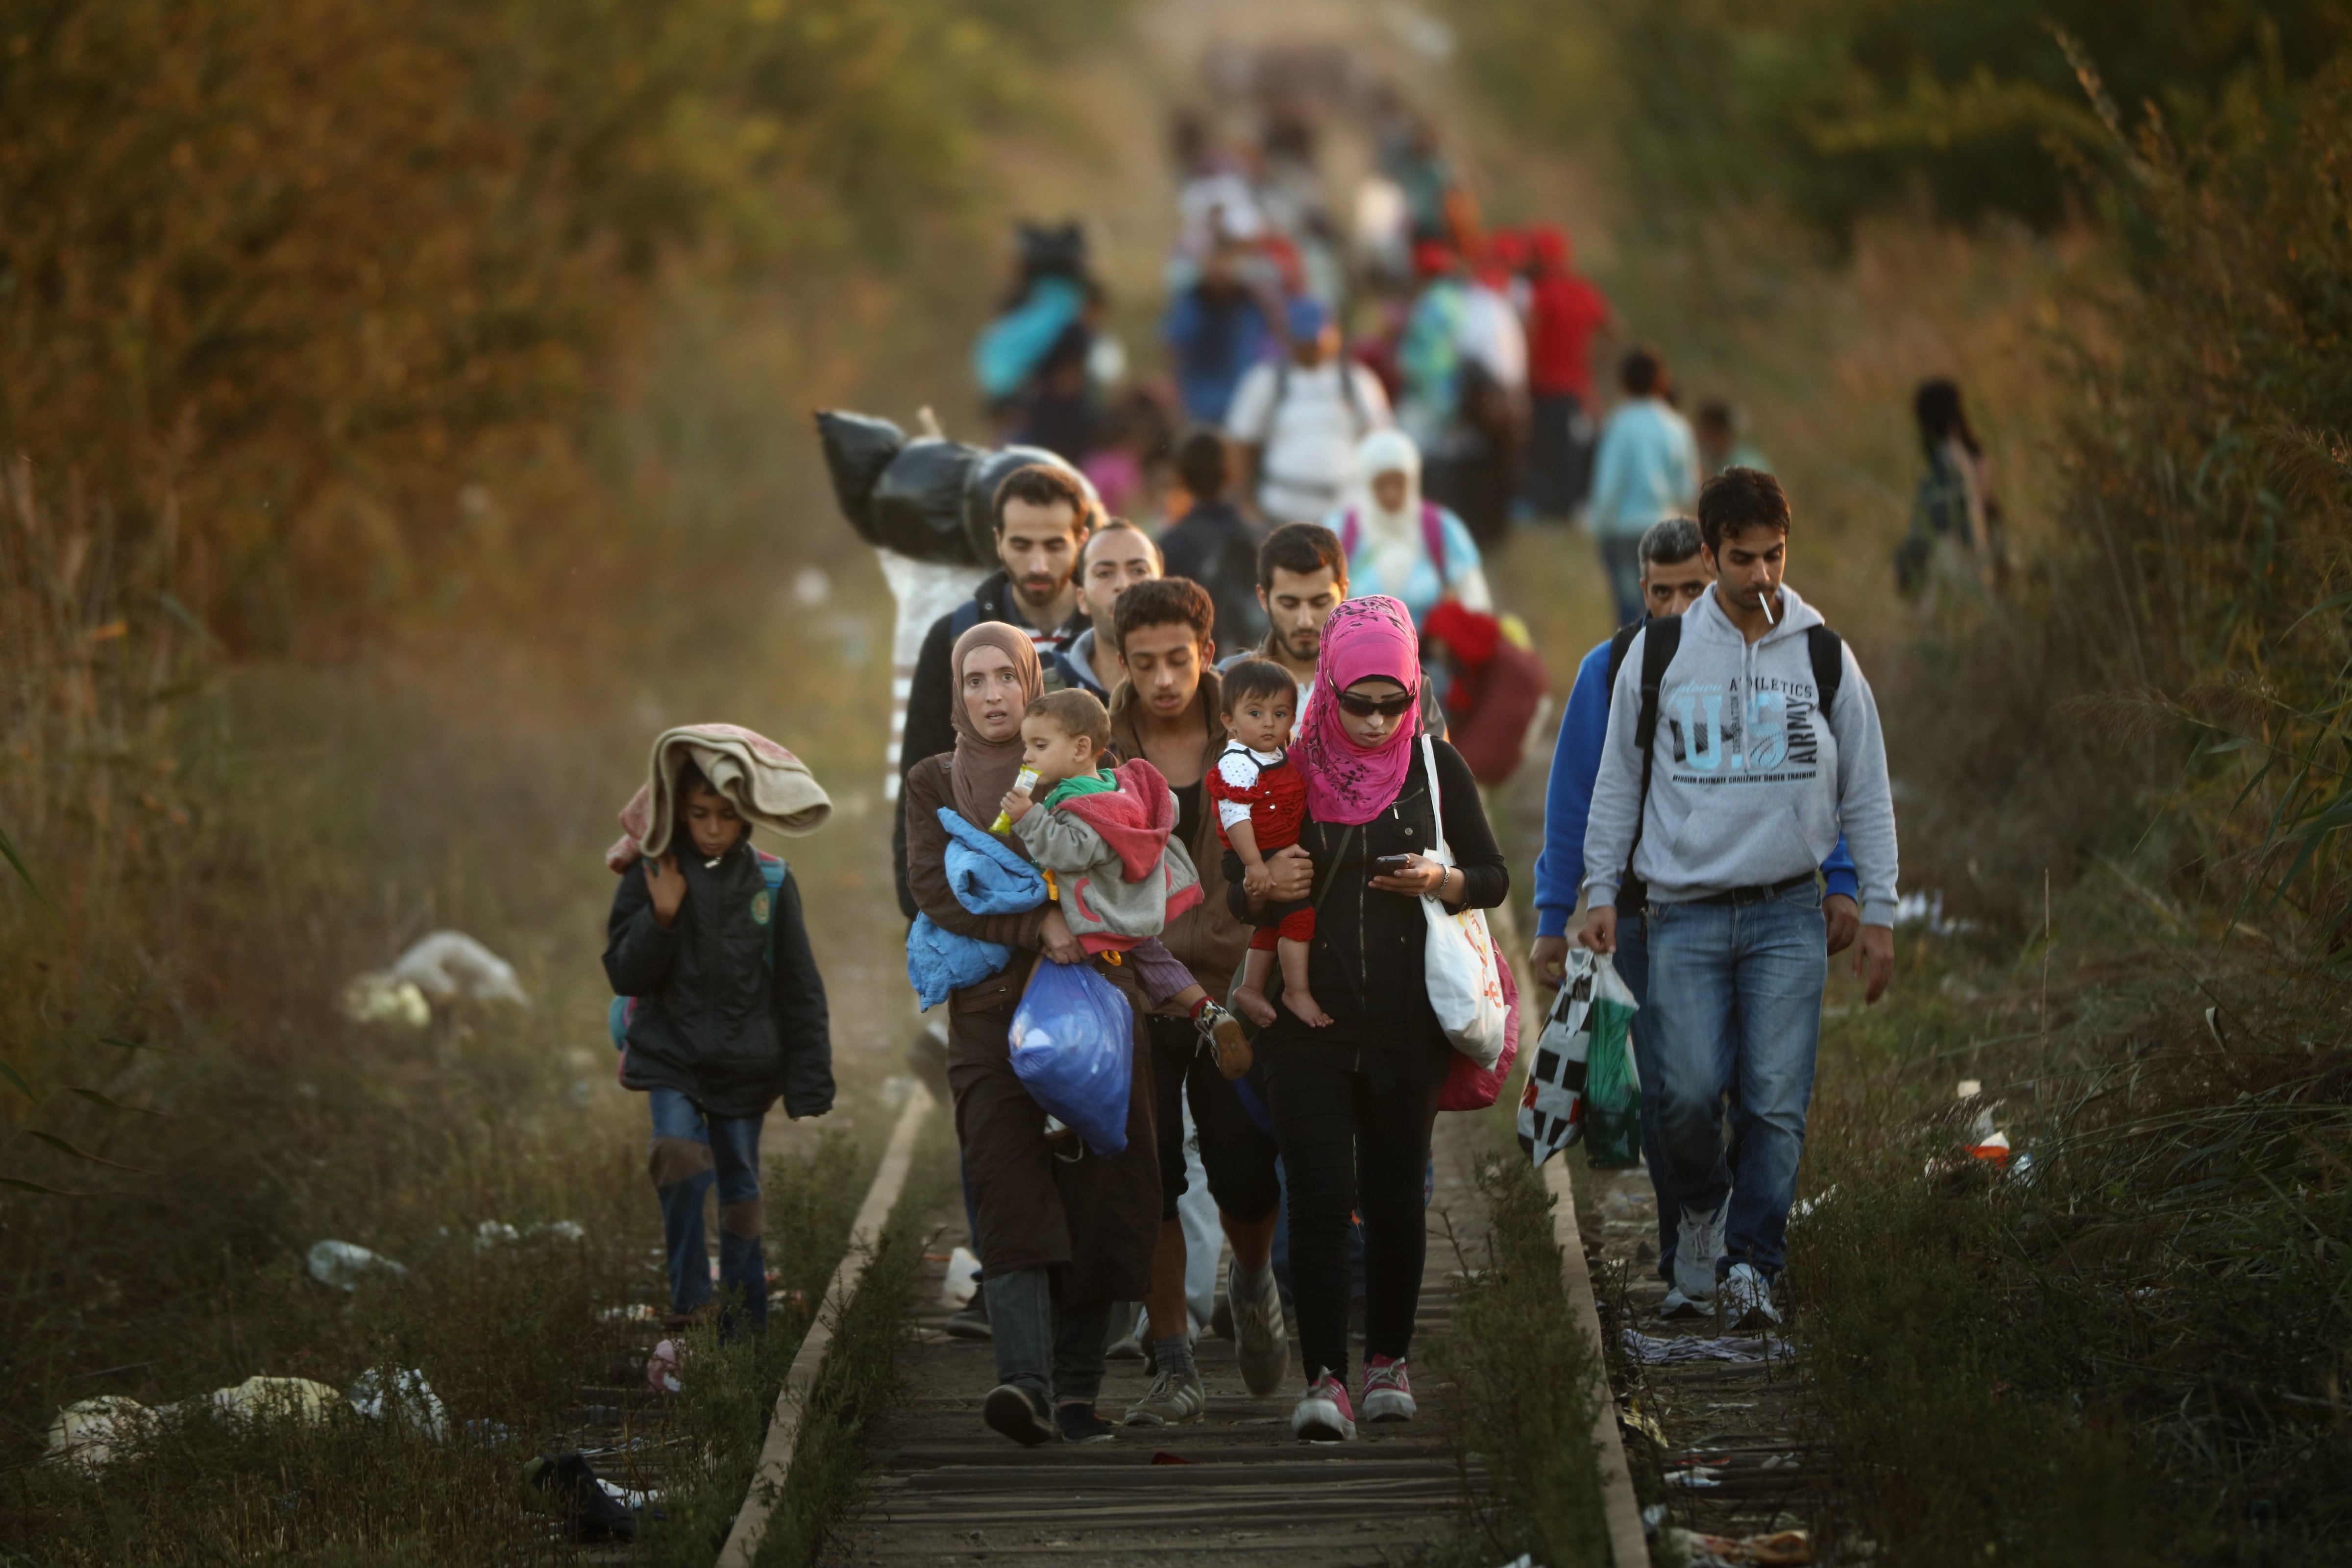 Migrants make their way through Serbia, near the town of Subotica, towards a break in the steel and razor fence erected on the  border by the Hungarian government on Sept. 9, 2015 in Subotica, Serbia. (Christopher Furlong— Getty Images)